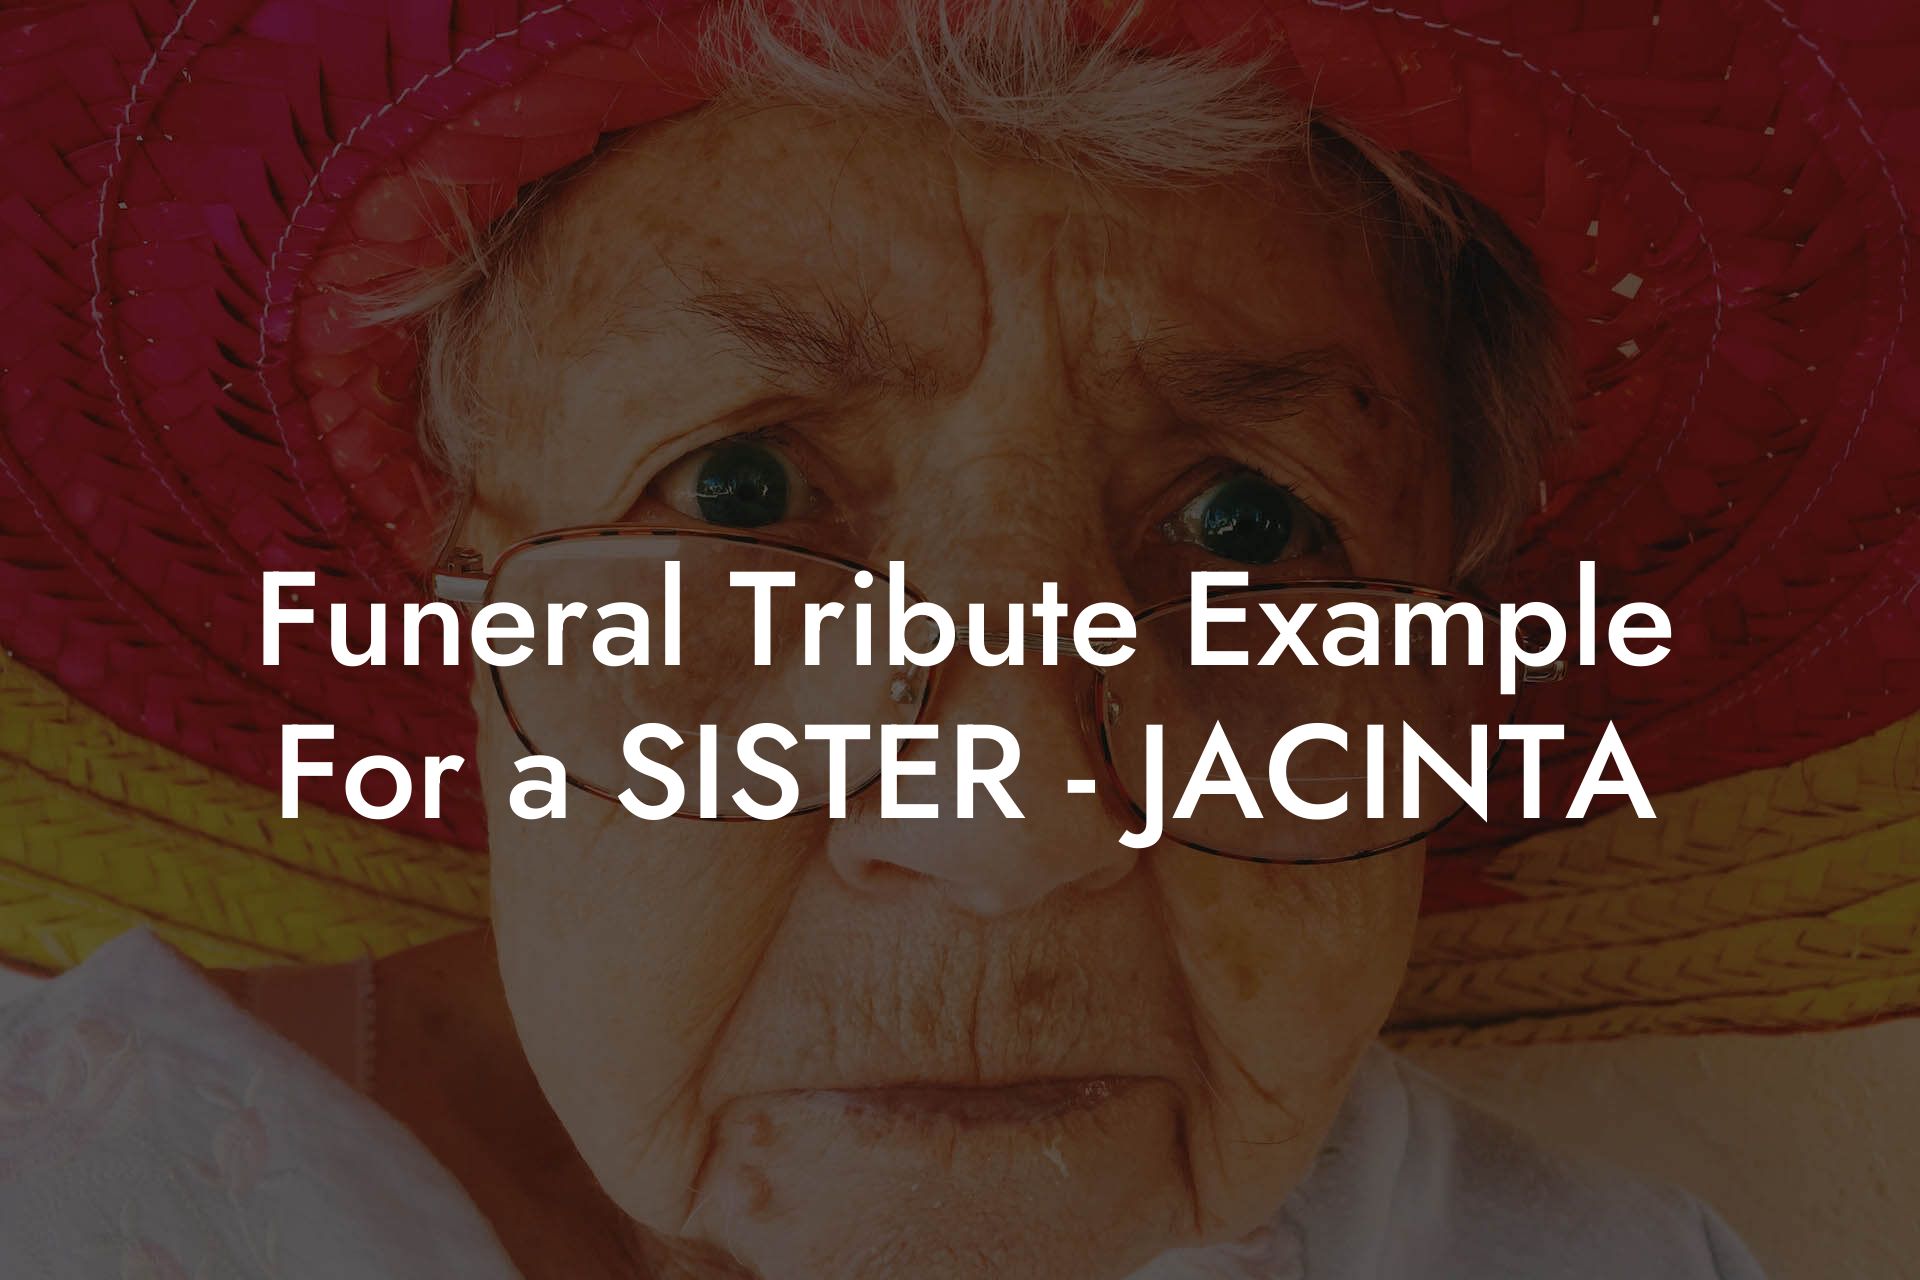 Funeral Tribute Example For a SISTER - JACINTA